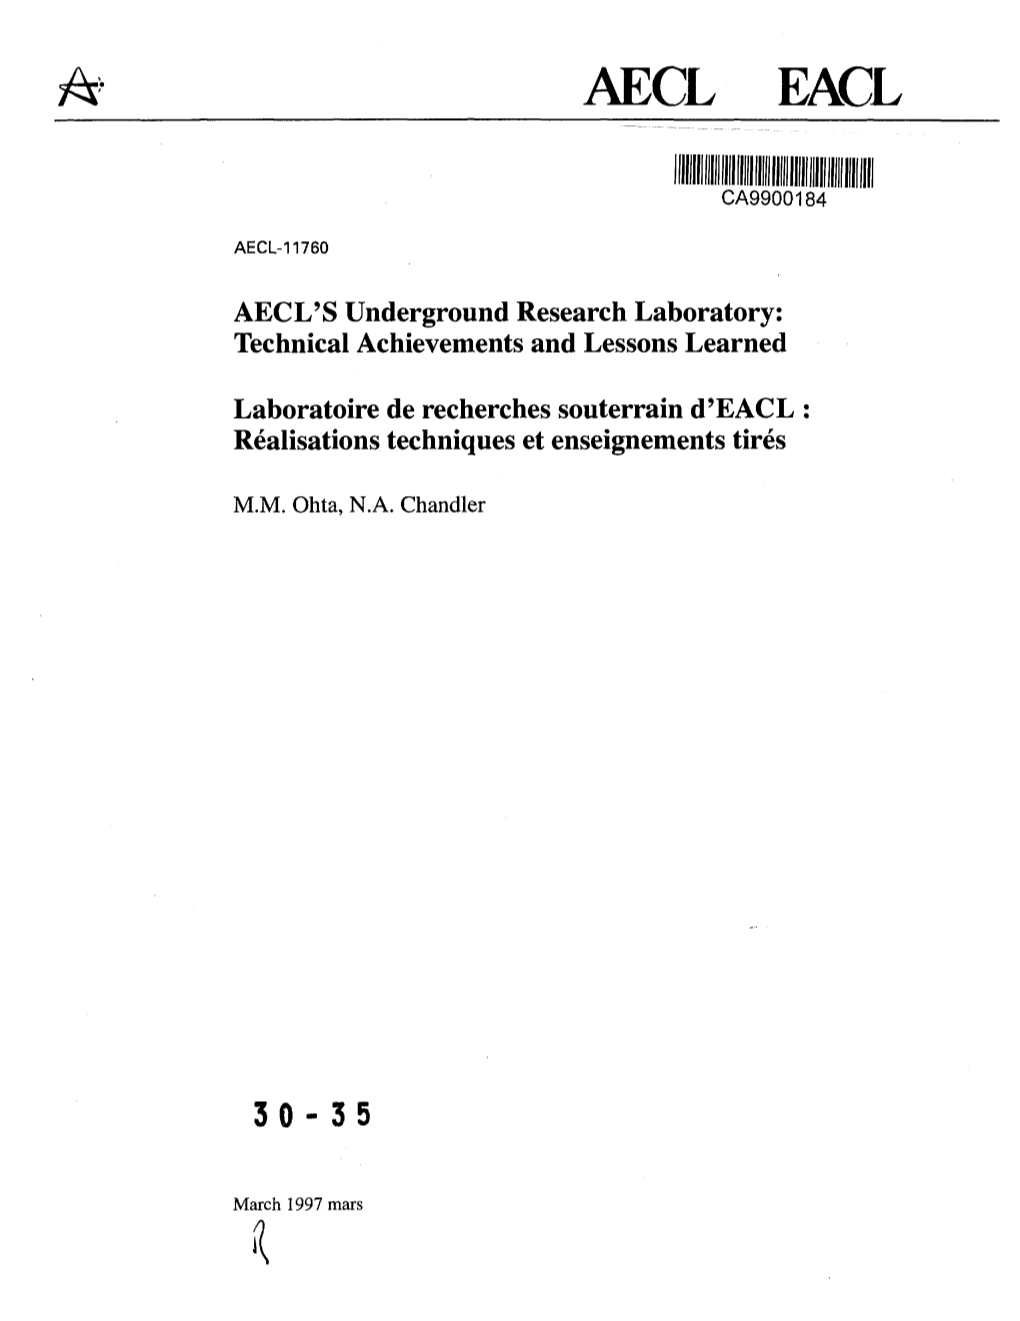 AECL's Underground Research Laboratory: Technical Achievements and Lessons Learned